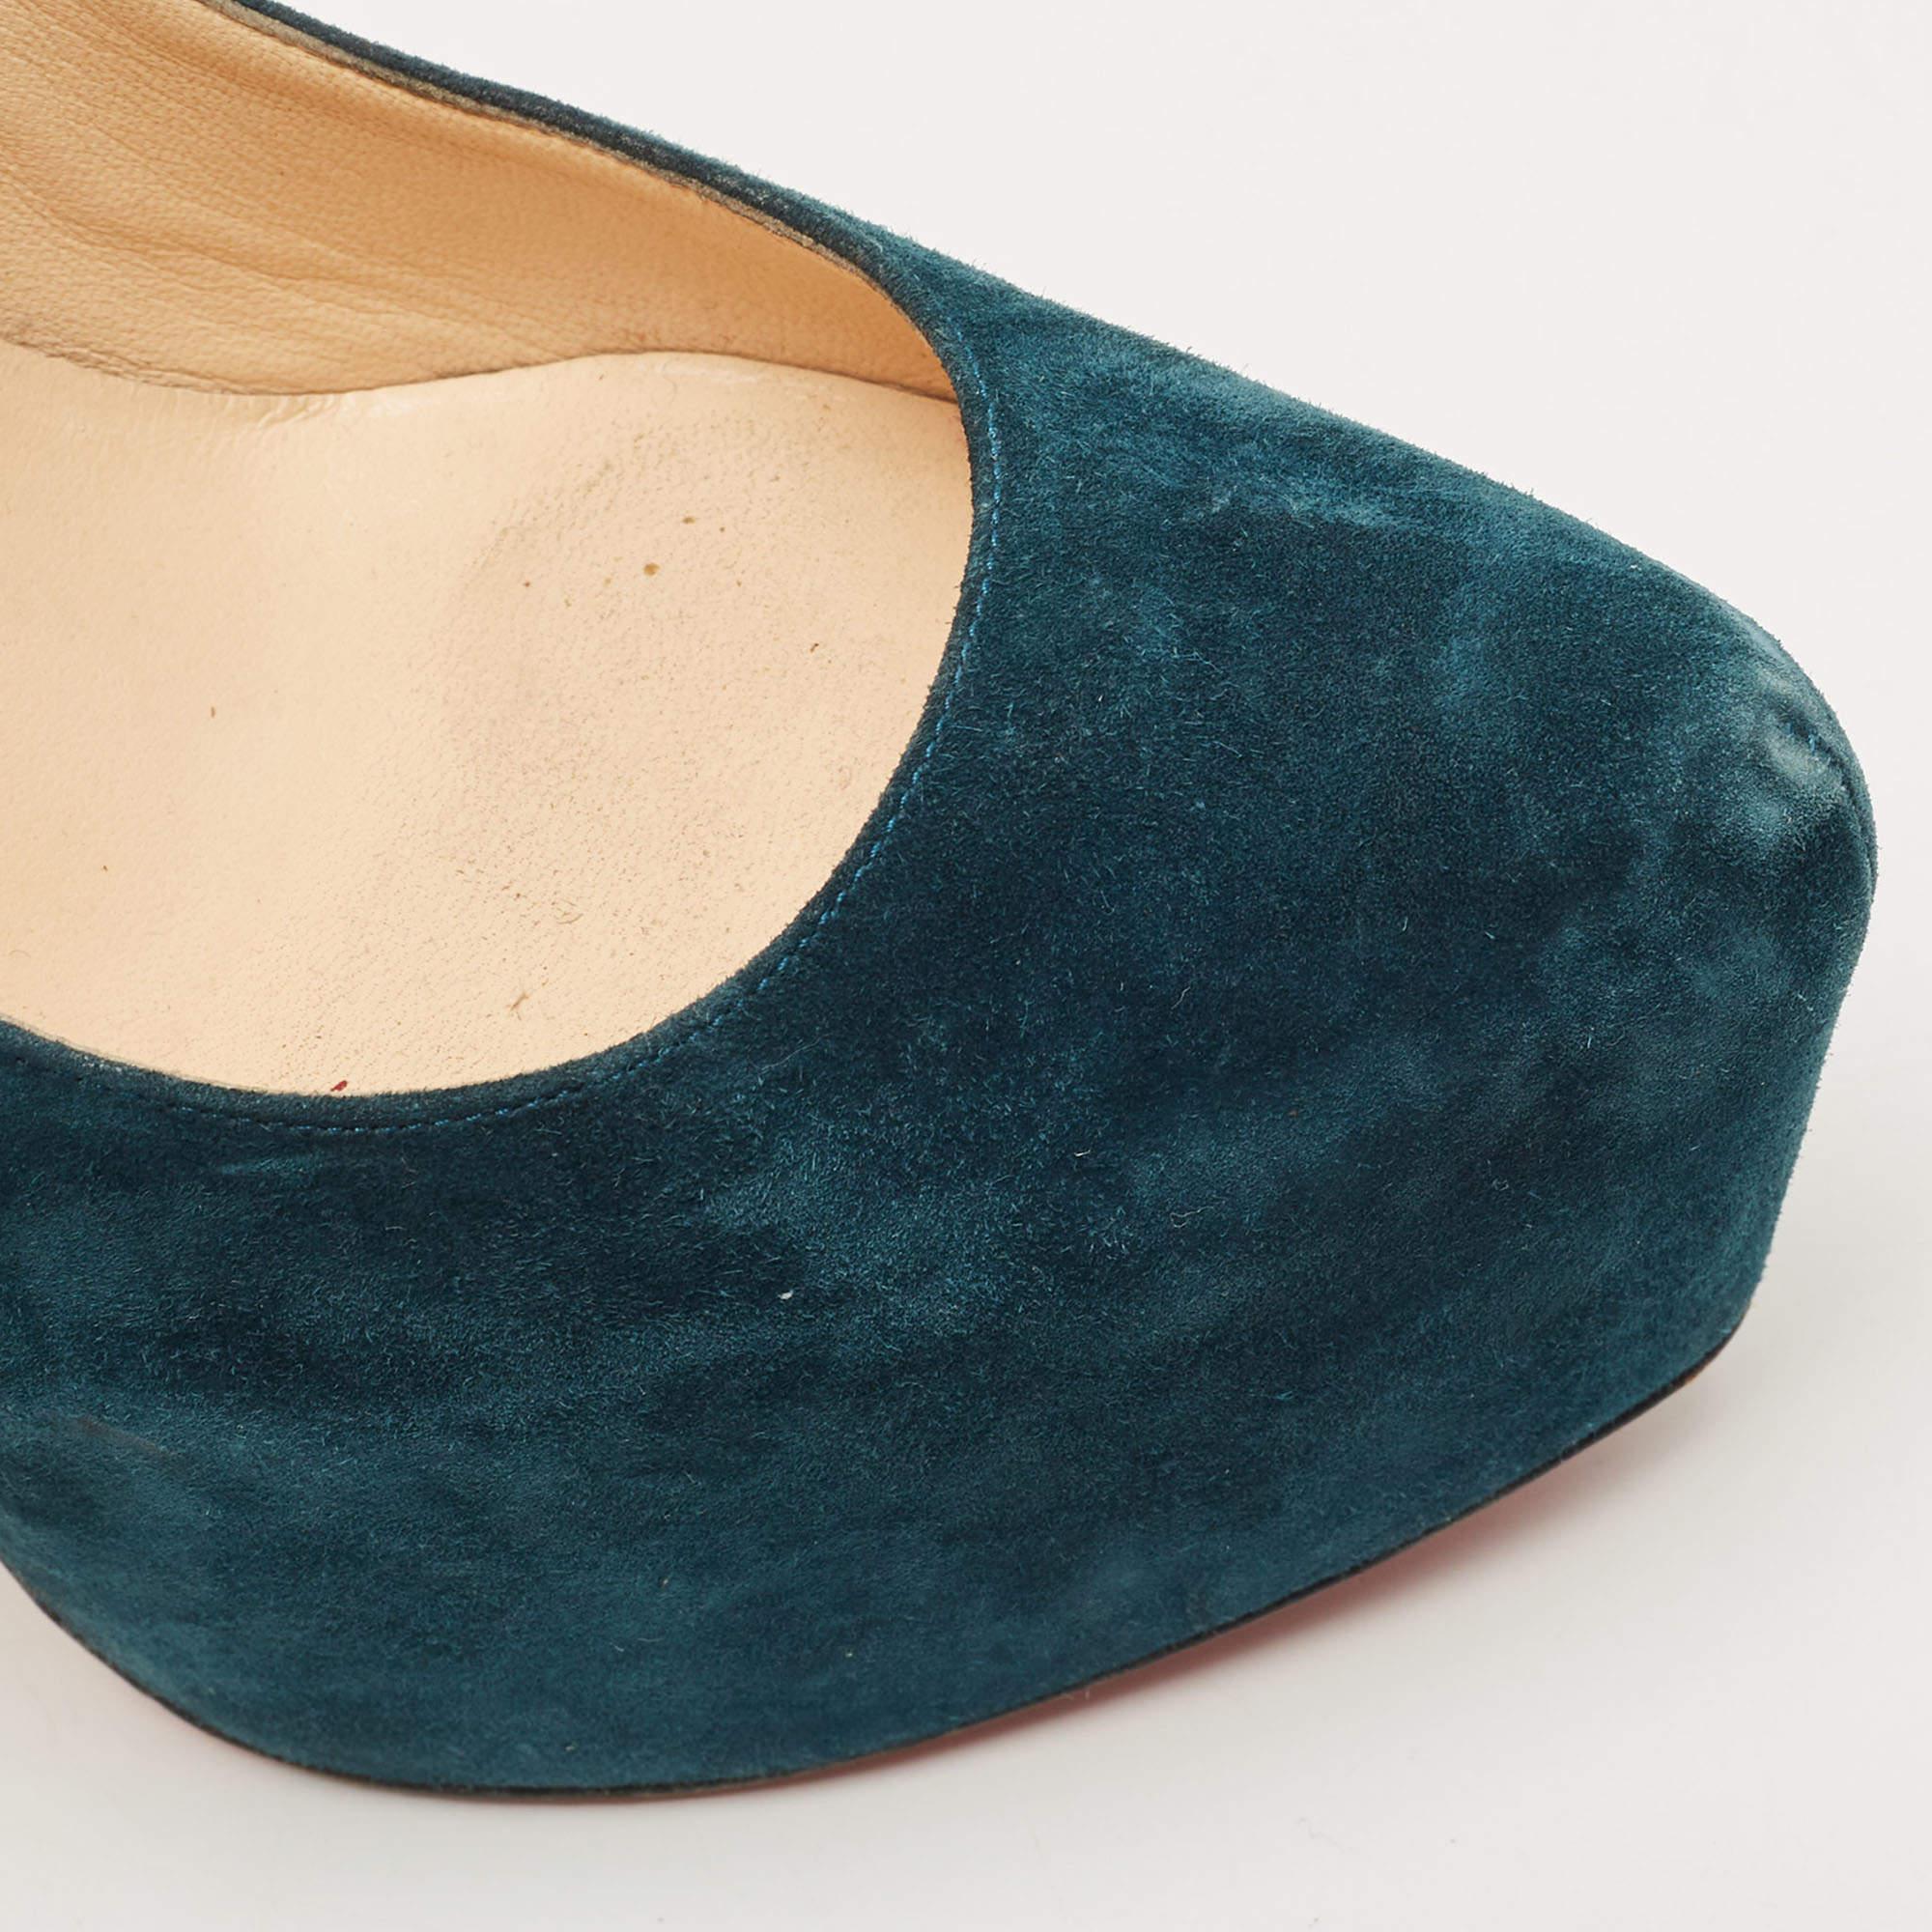 Christian Louboutin Teal Blue Suede Daffodile Platform Pumps Size 38 For Sale 3